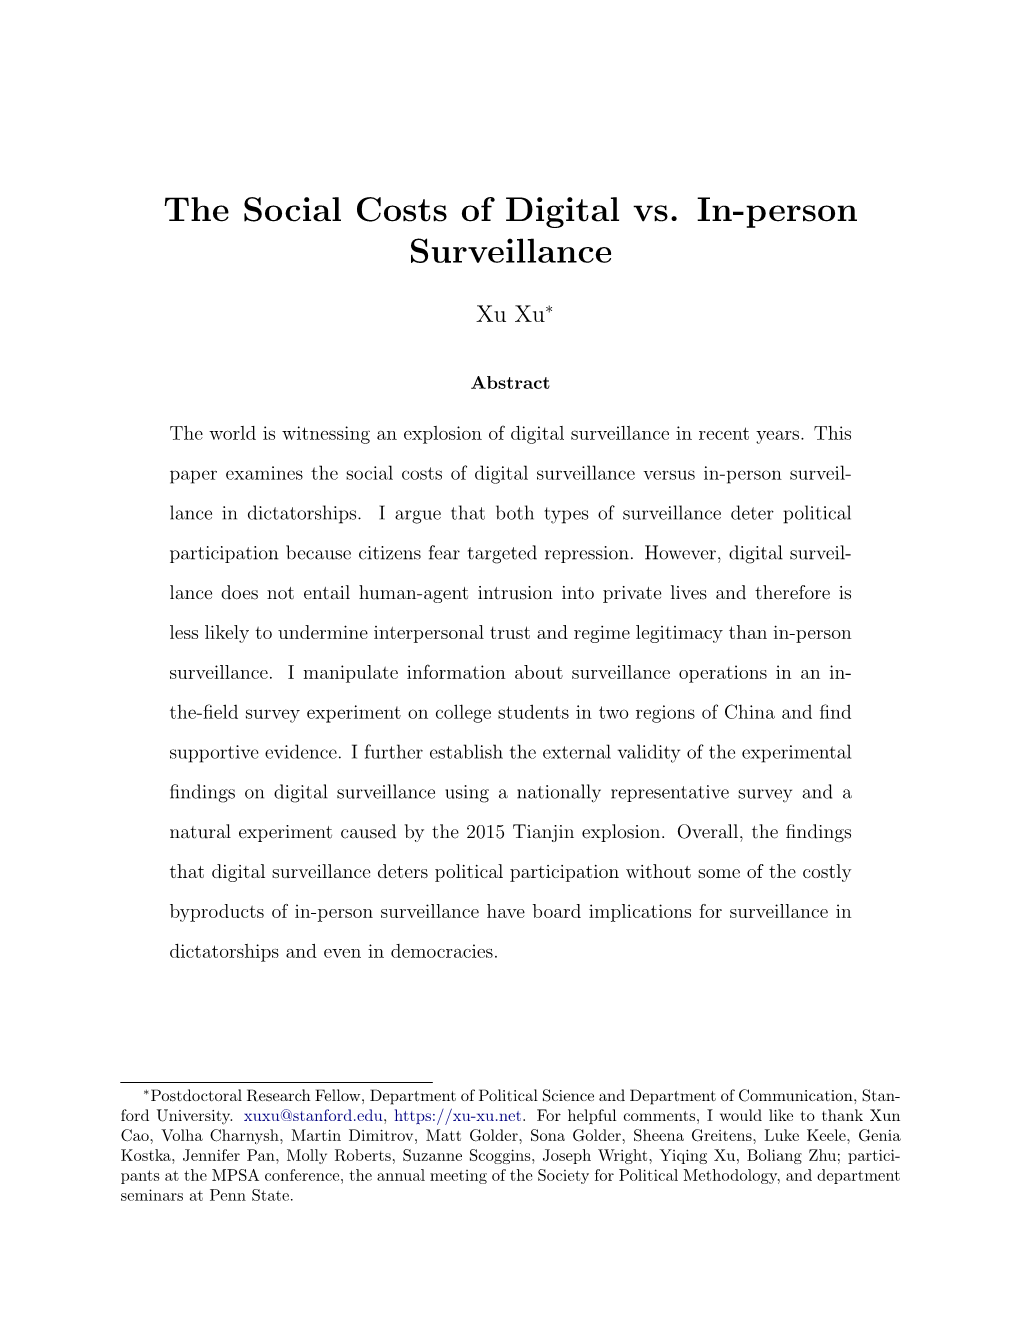 The Social Costs of Digital Vs. In-Person Surveillance